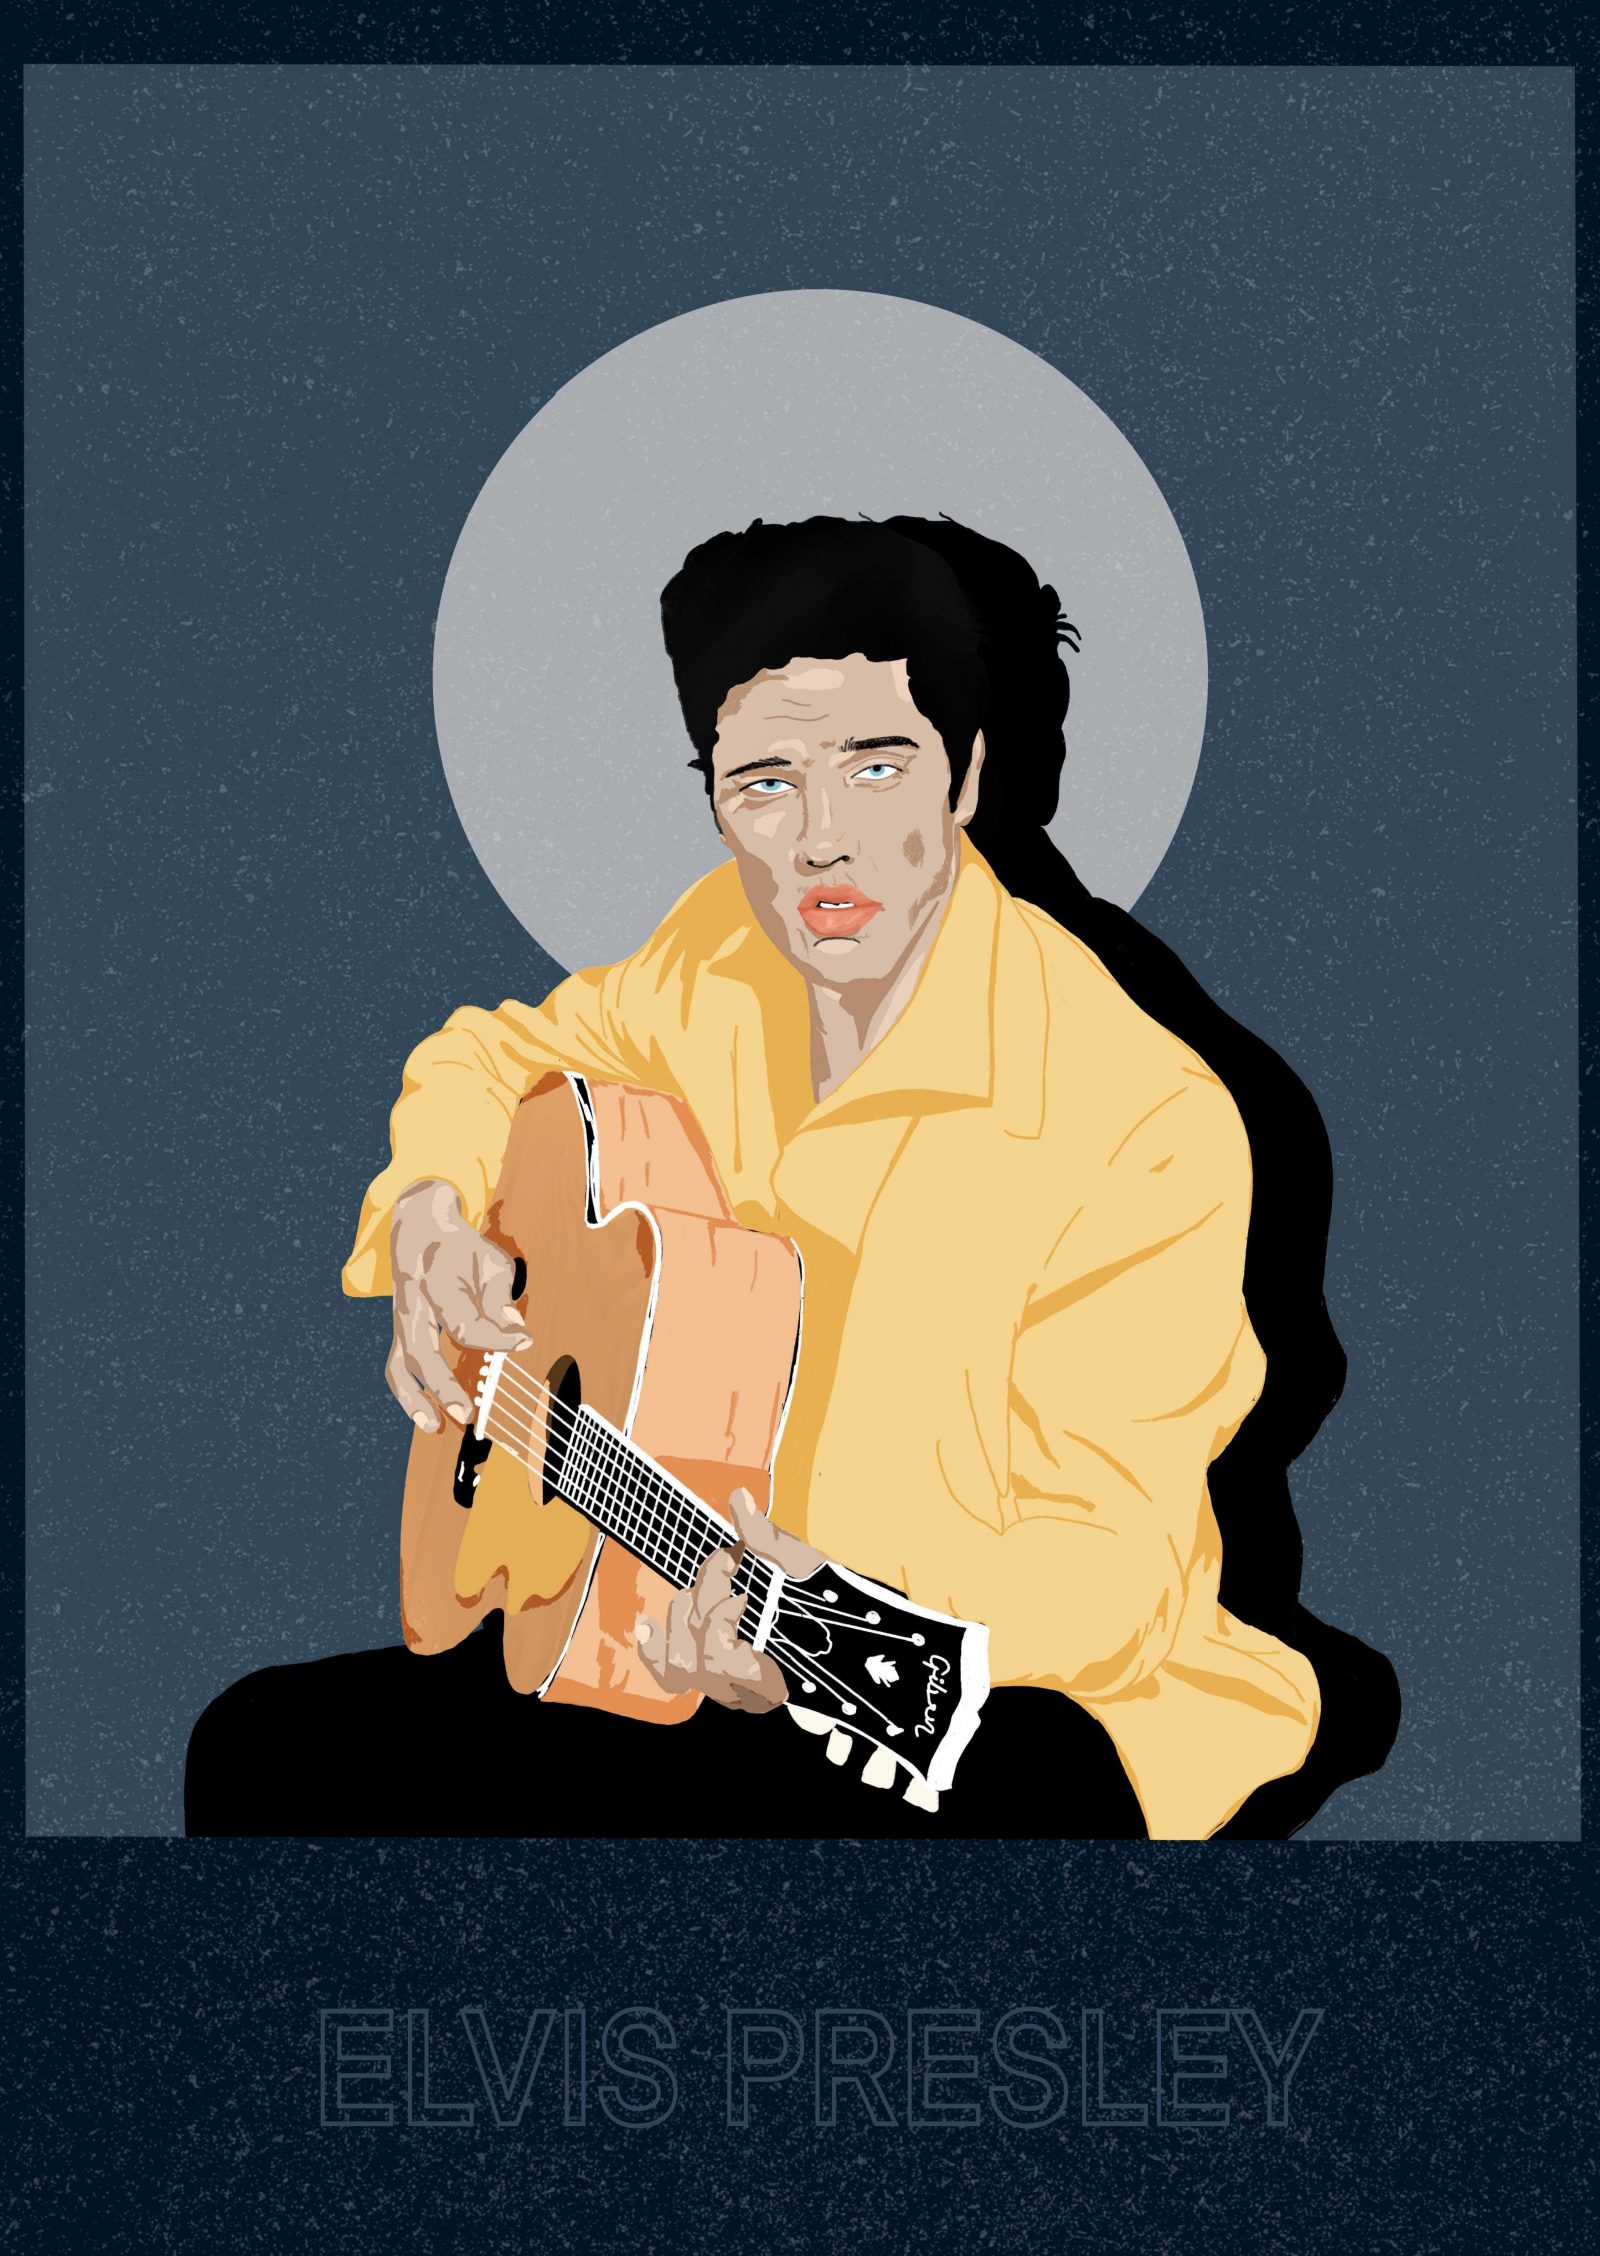 An illustration of Elvis Presley wearing a light yellow jacket and holding a guitar.